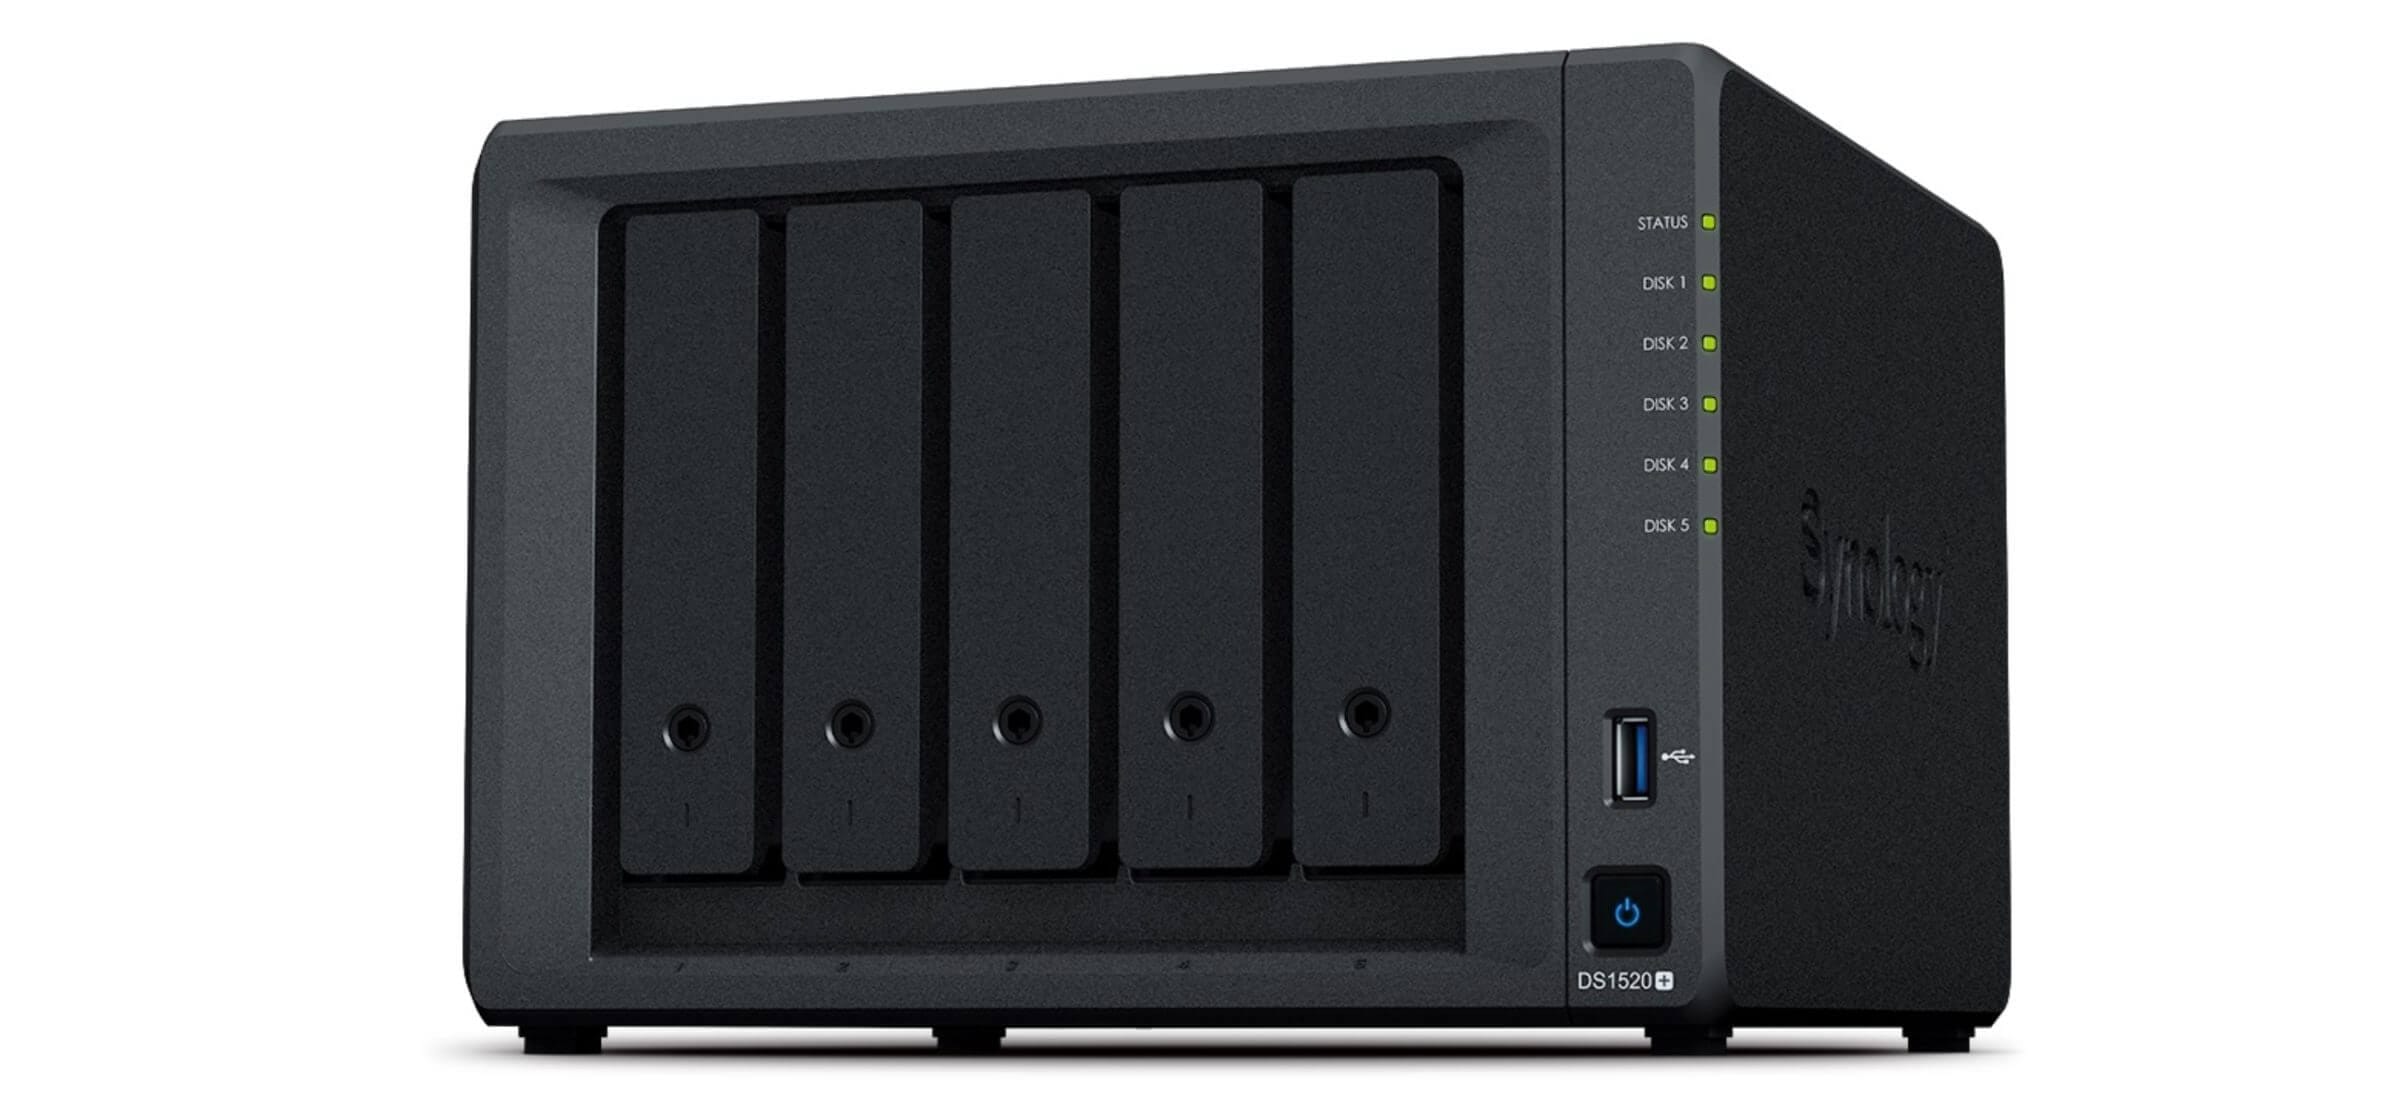 Synology DS1520+ Review